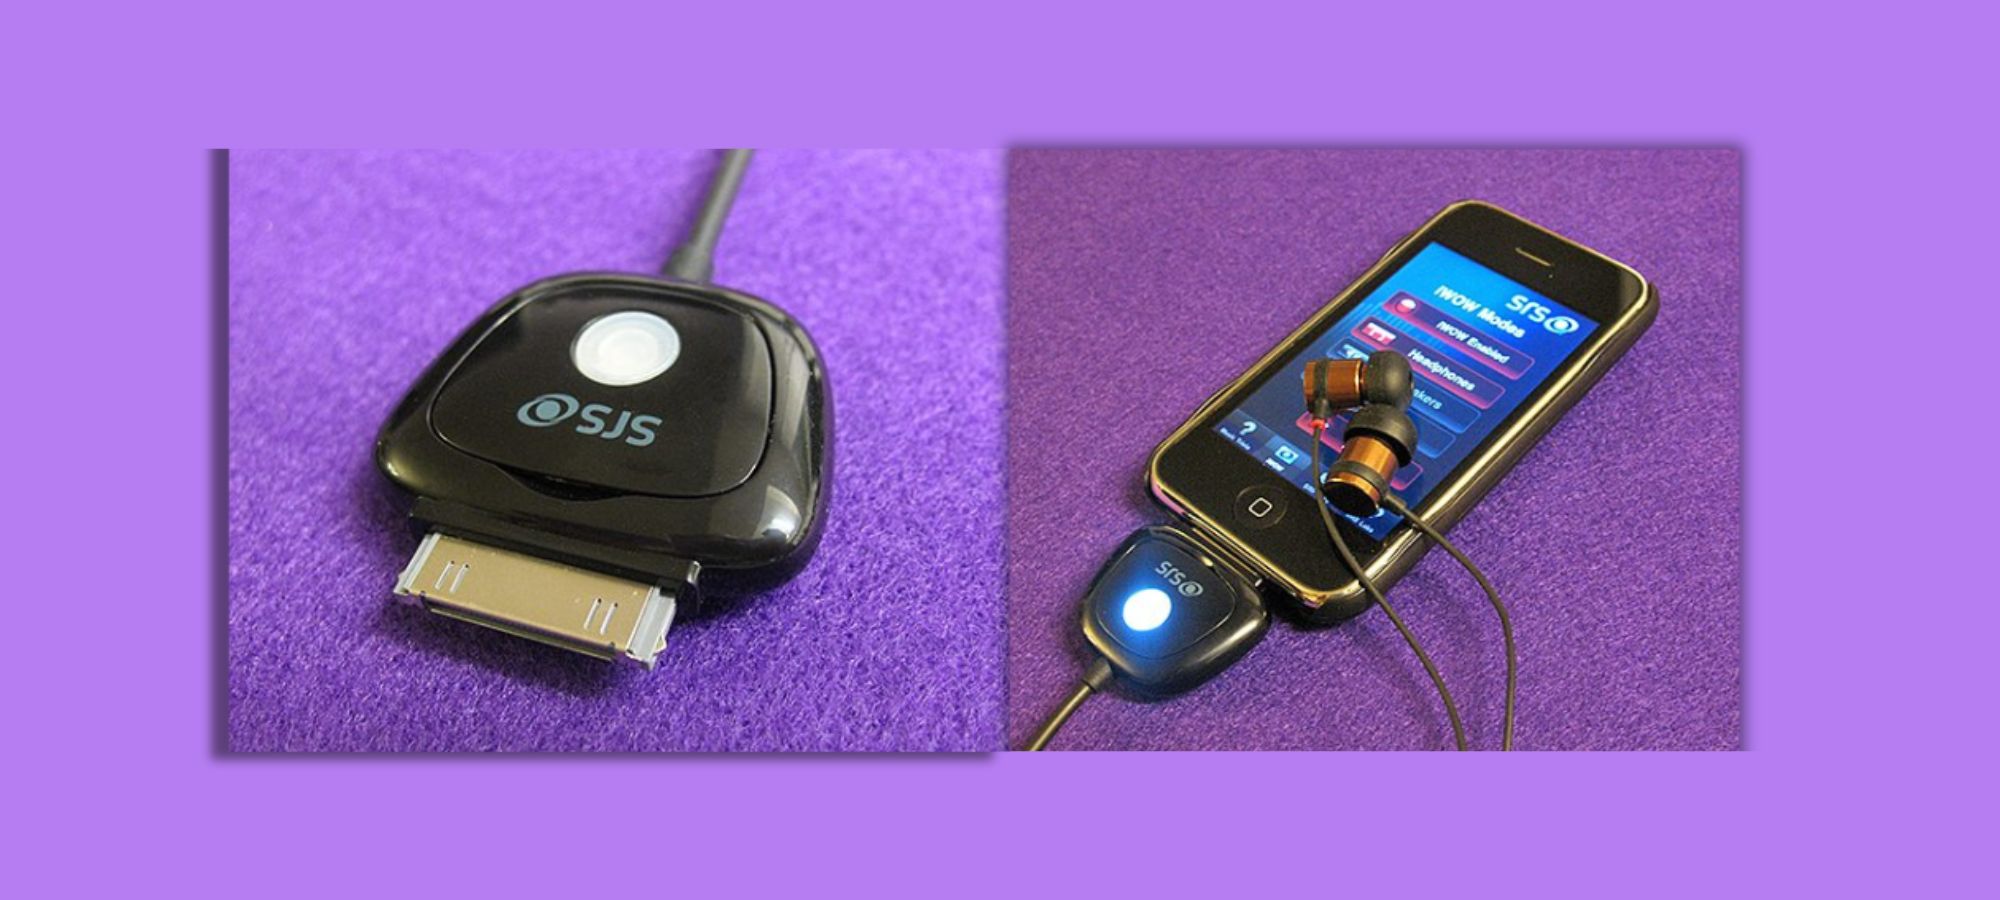 srs-iwow-3d-brings-3d-audio-to-iphone-ipad-and-ipod-touch